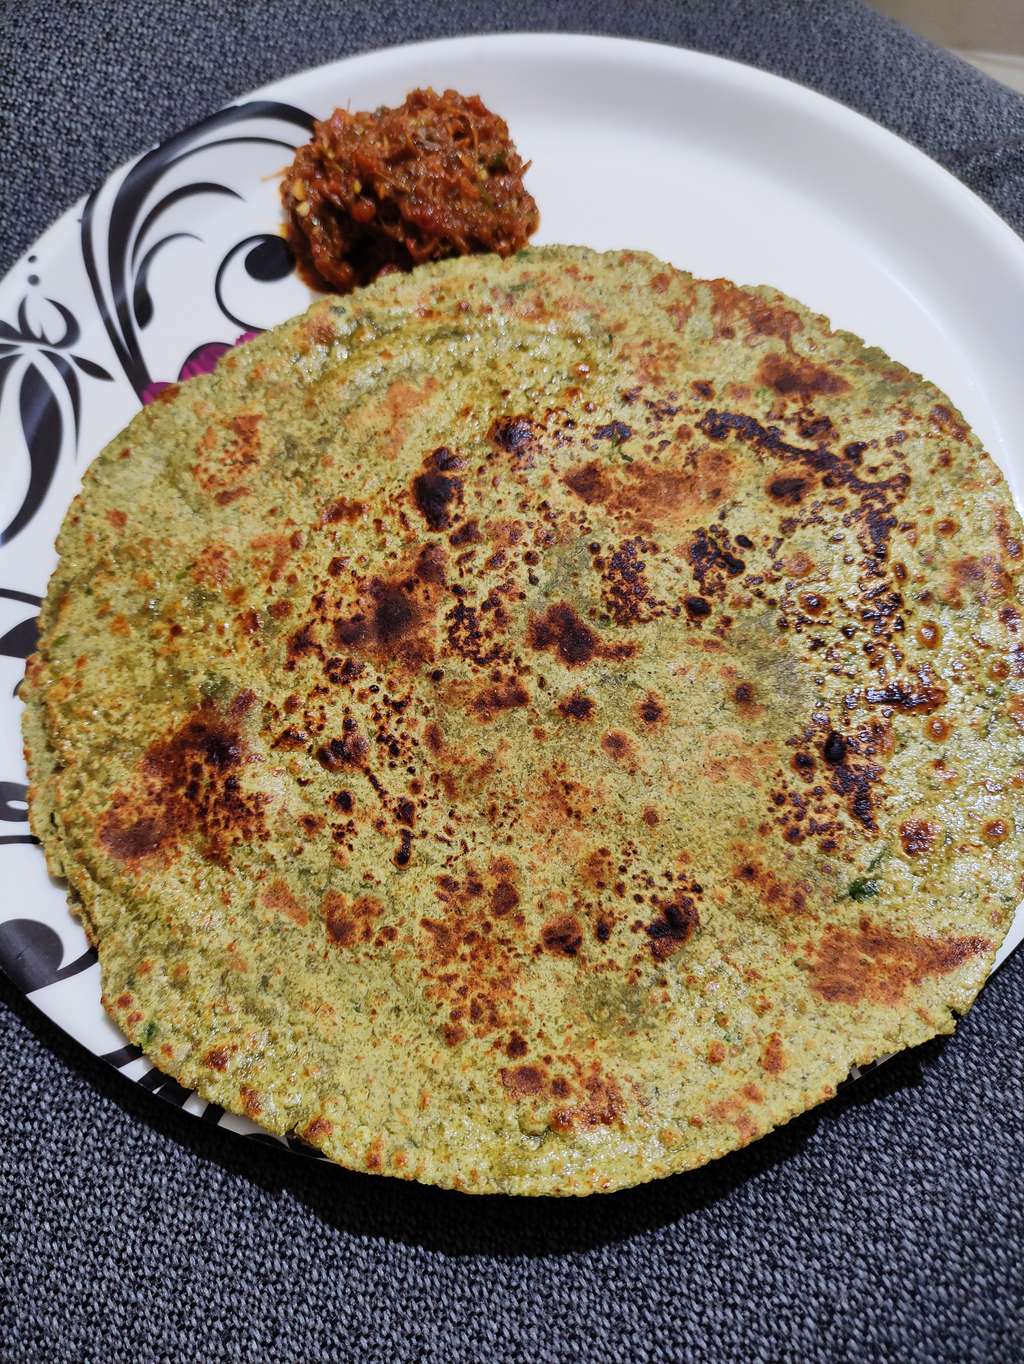 Dhapate (High Protein Delicious Roti)